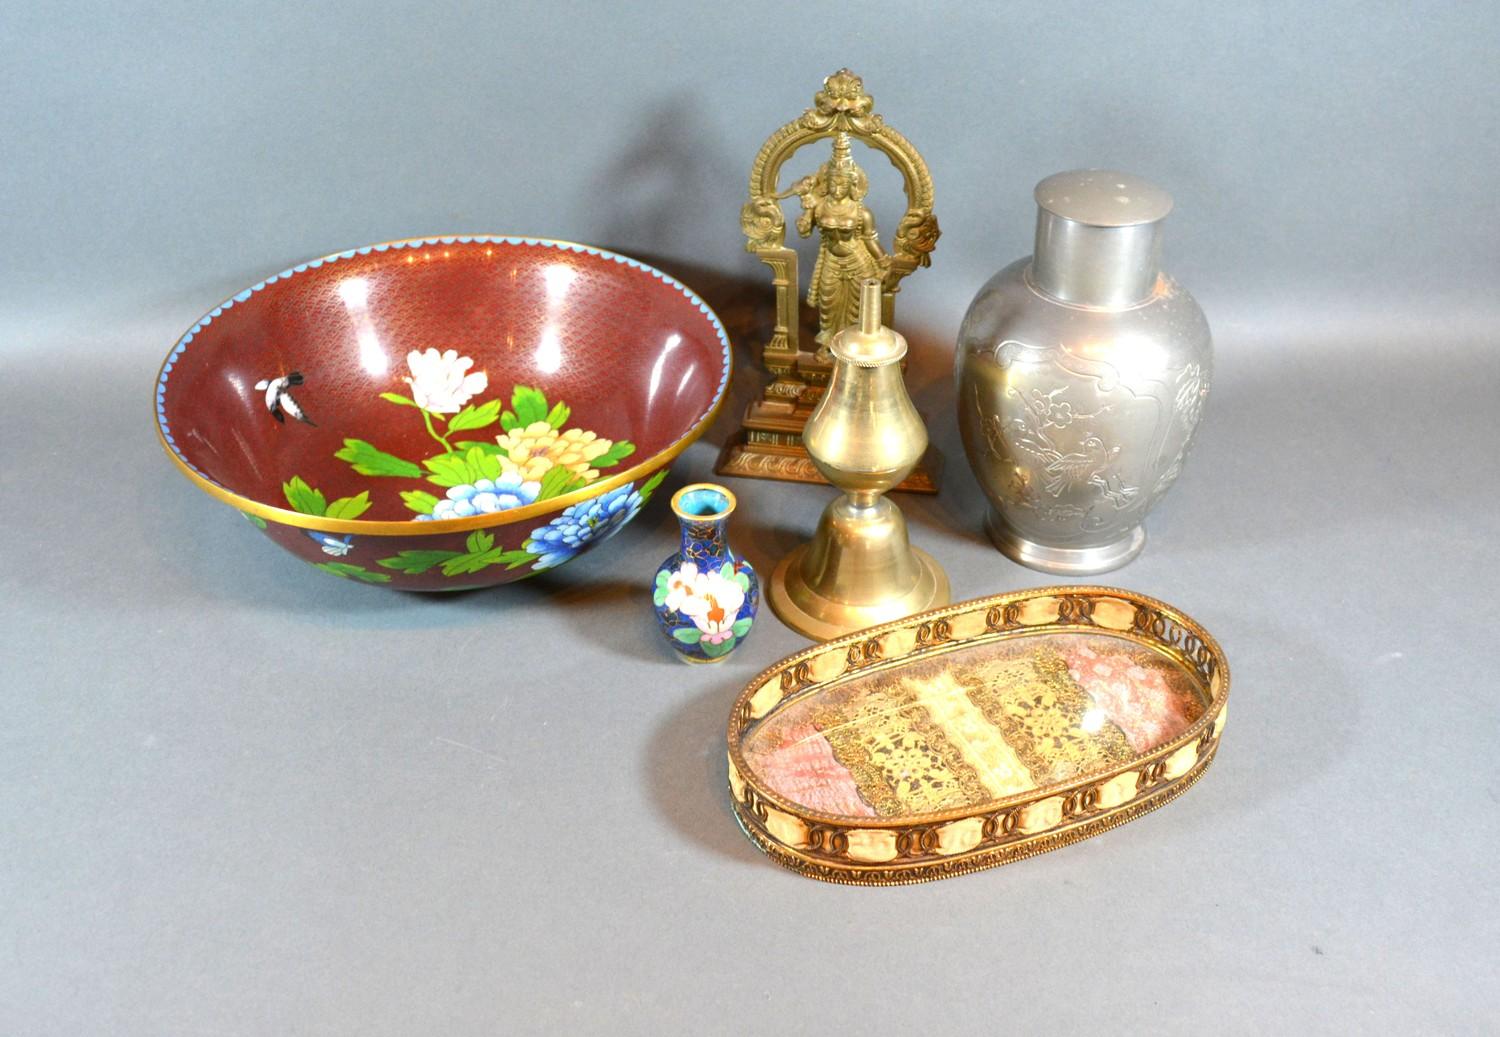 A Cloisonne Bowl together with various other related items